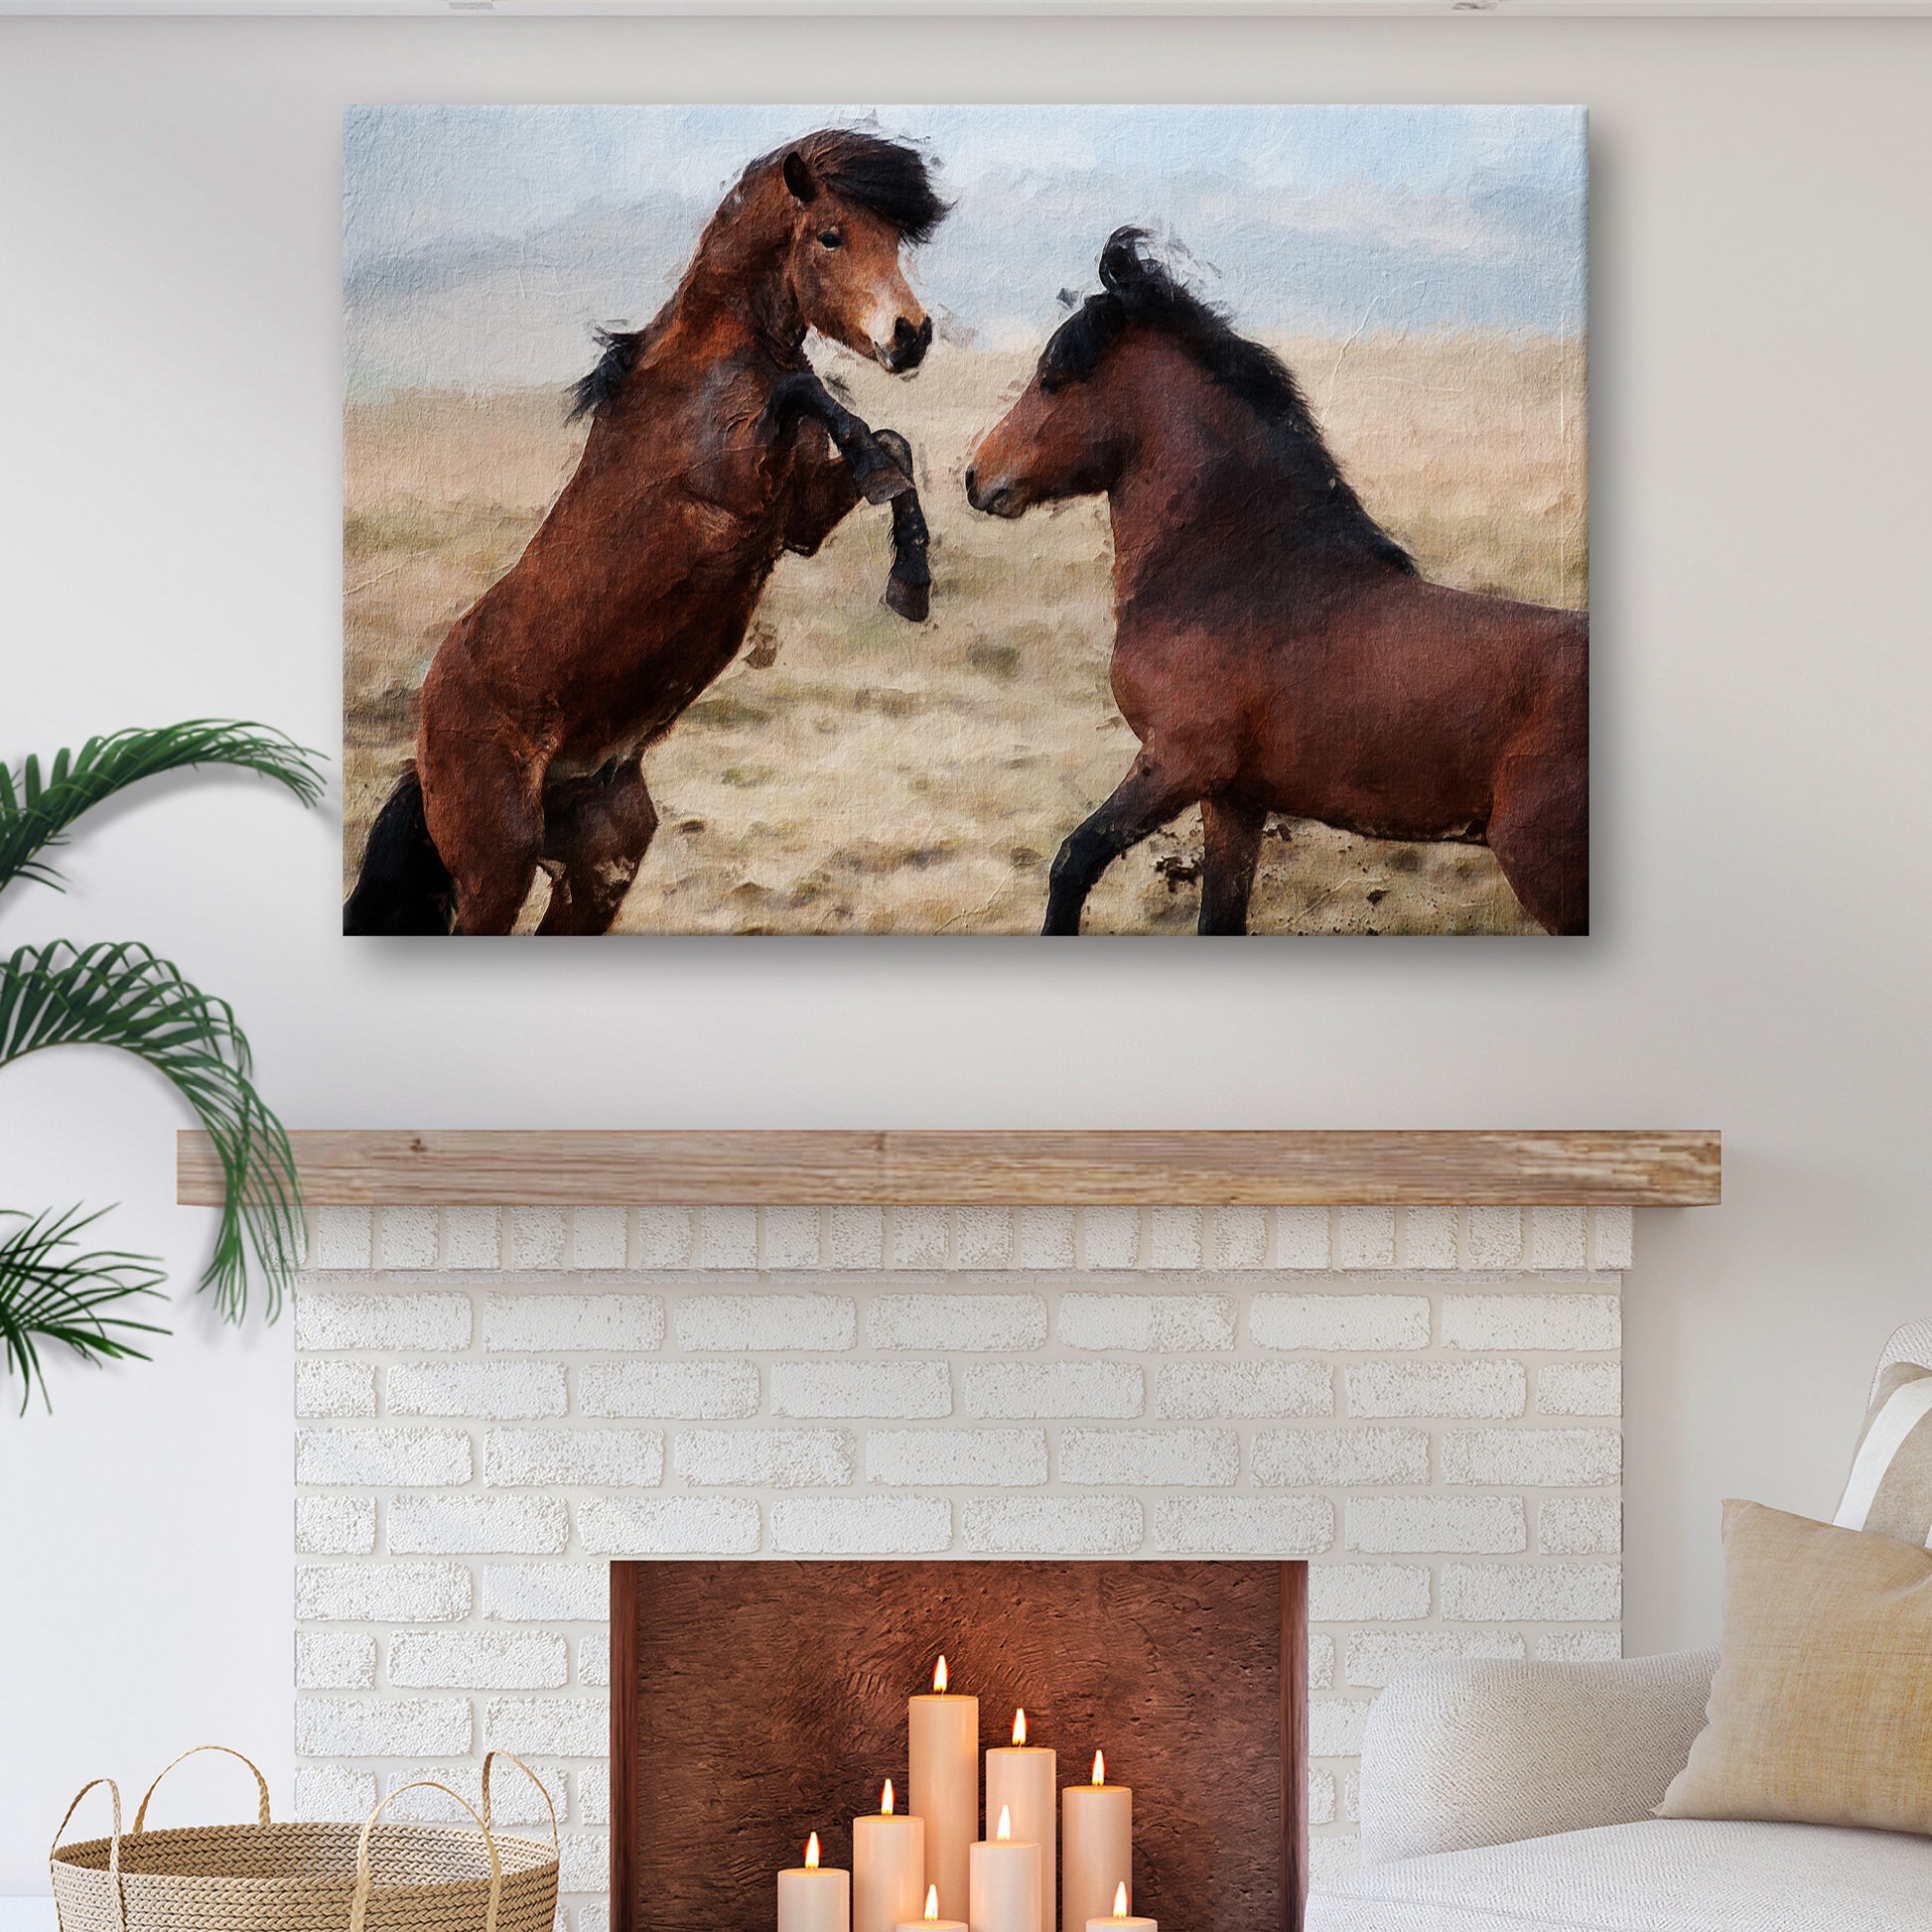 Clashing Wild Horses In Watercolor Canvas Wall Art - Image by Tailored Canvases